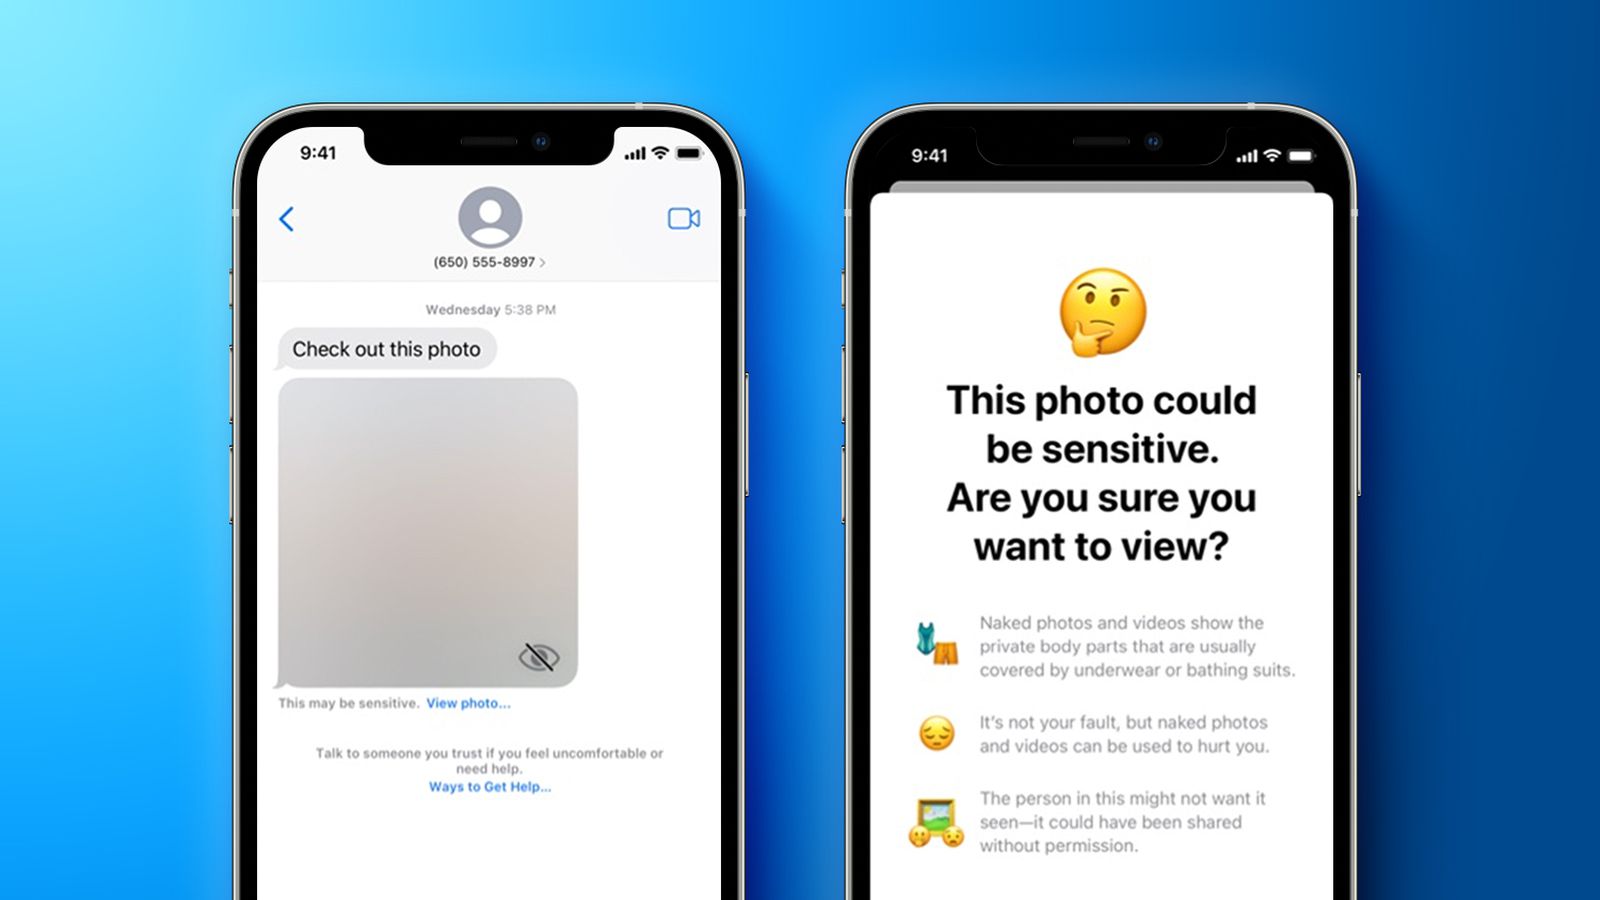 Apple's Messages Communication Safety Explained: What You Need to Know